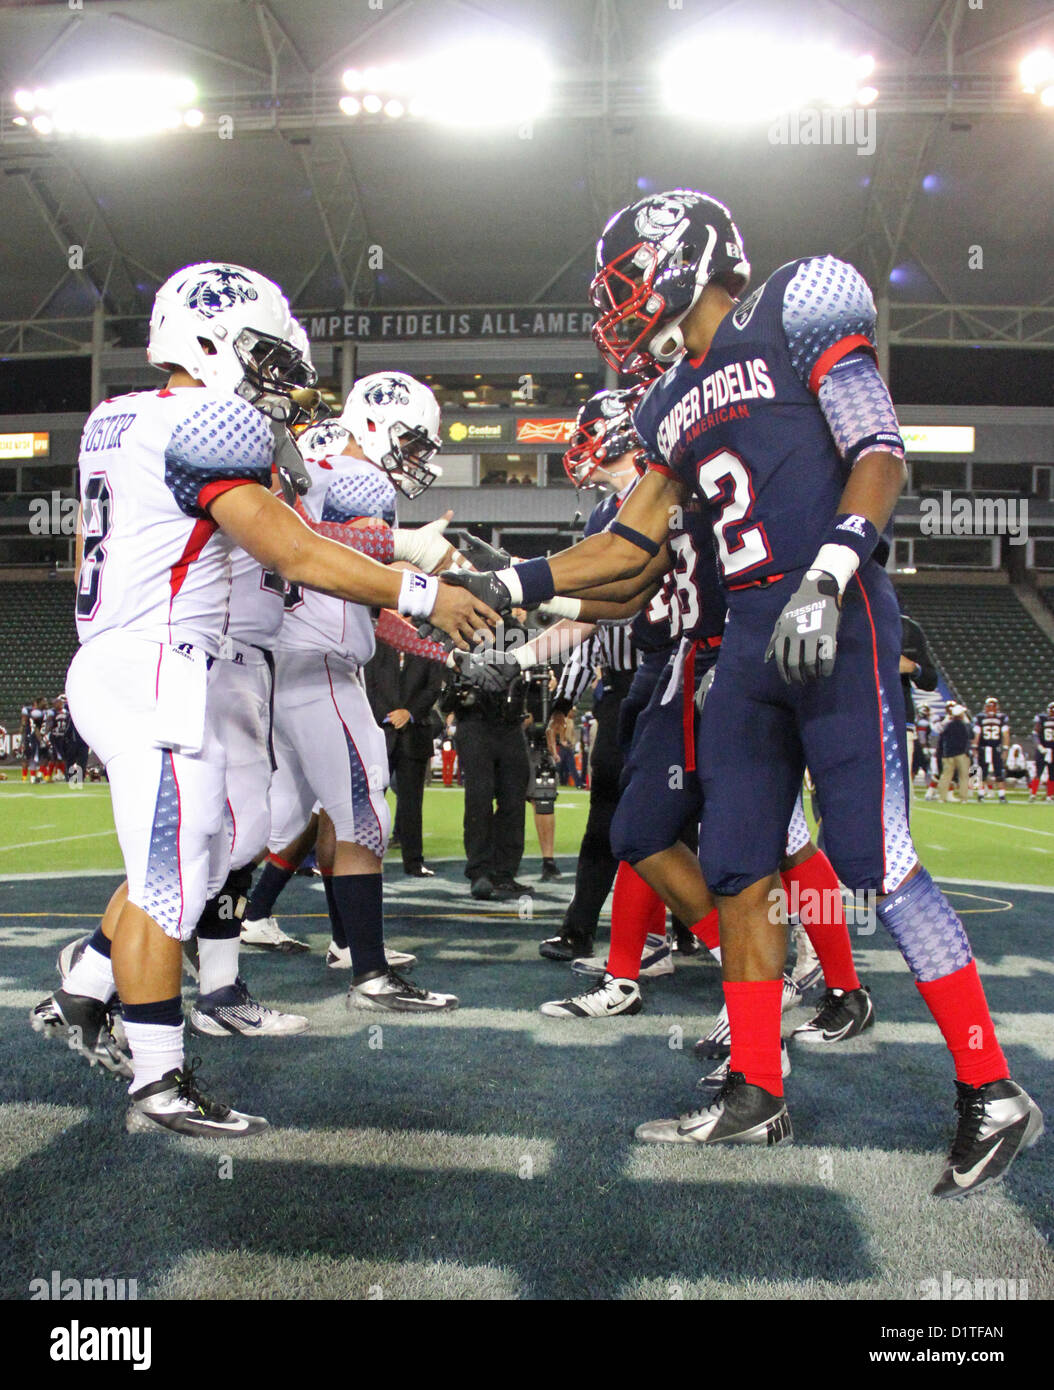 Players from the East and West teams shake hand before begining the Semper Fidelis All-American Bowl game, Jan. 4, 2013 at the Home Depot Center, Carson, Calif. The Semper Fidelis All-American Bowl is the culmination of the Marine Corps Semper Fidelis' Football Program, through which the Marine Corps purposefully engages with well-rounded student athletes to share leadership lessons that will enable future successes in their academic and athletic careers. (U.S. Marine Corps photo by Cpl. Jen S. Martinez) Stock Photo